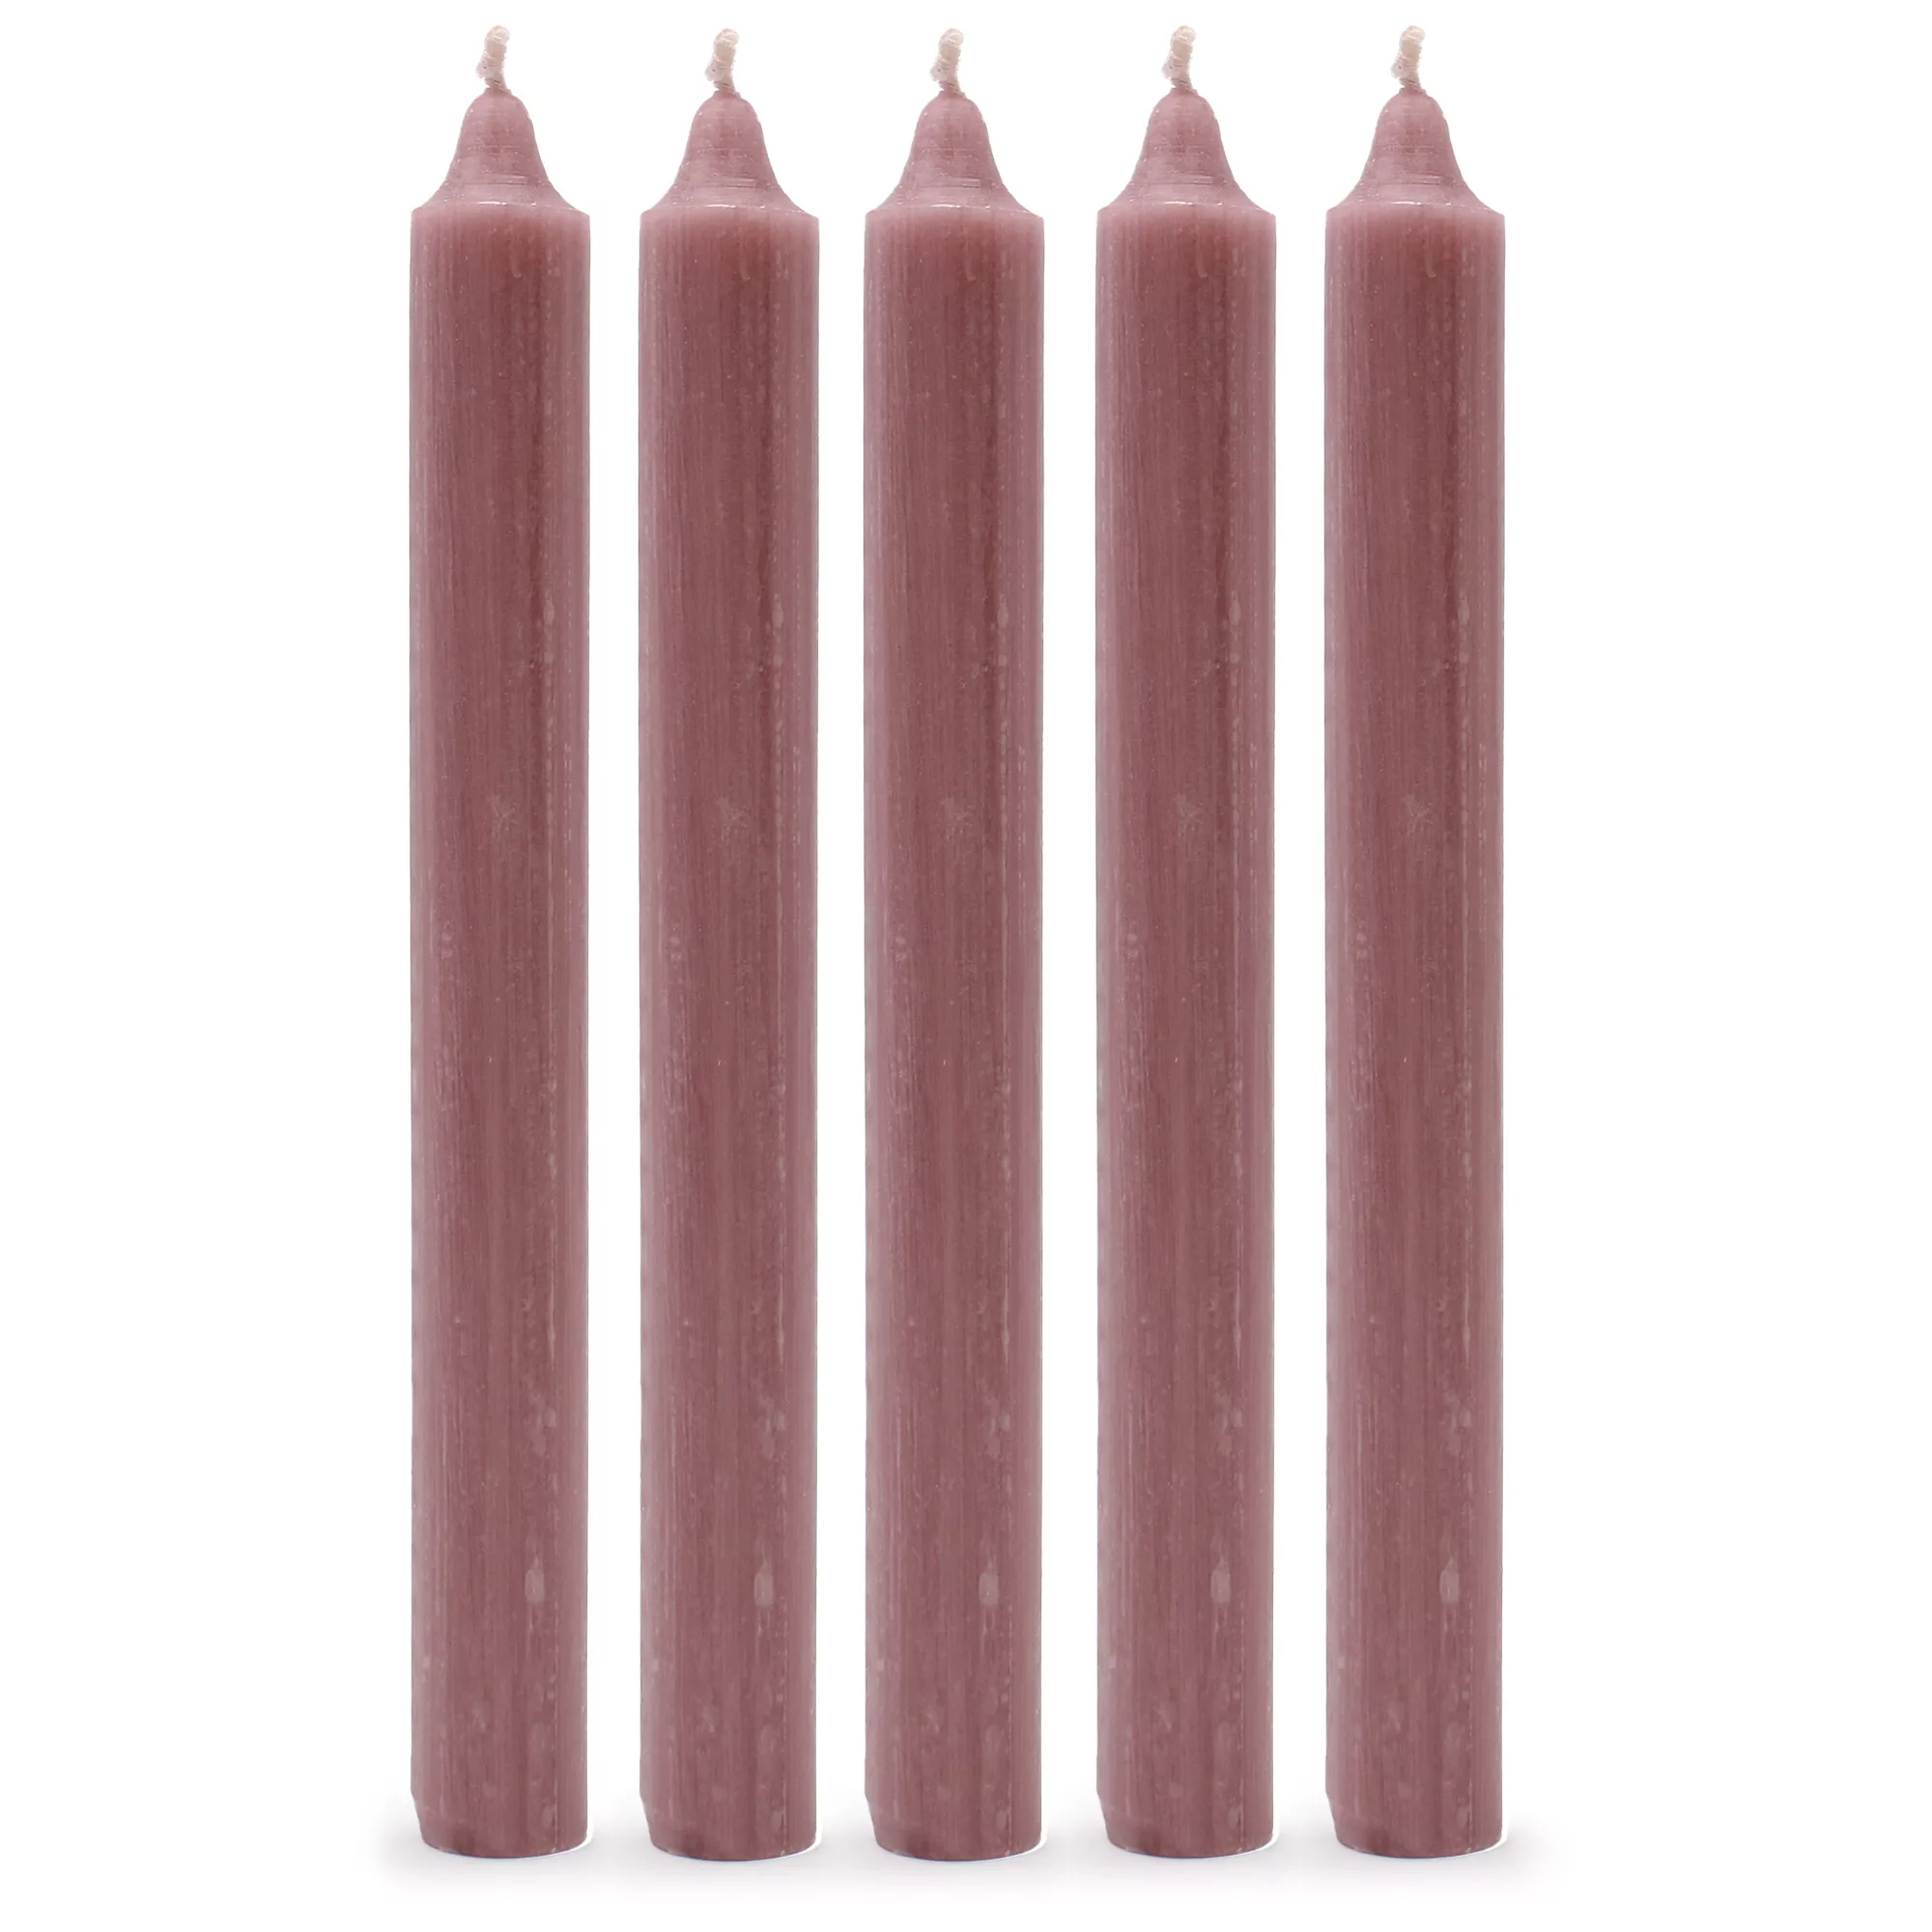 Solid Colour Dinner Candles – Rustic Dusty Pink – Pack of 5